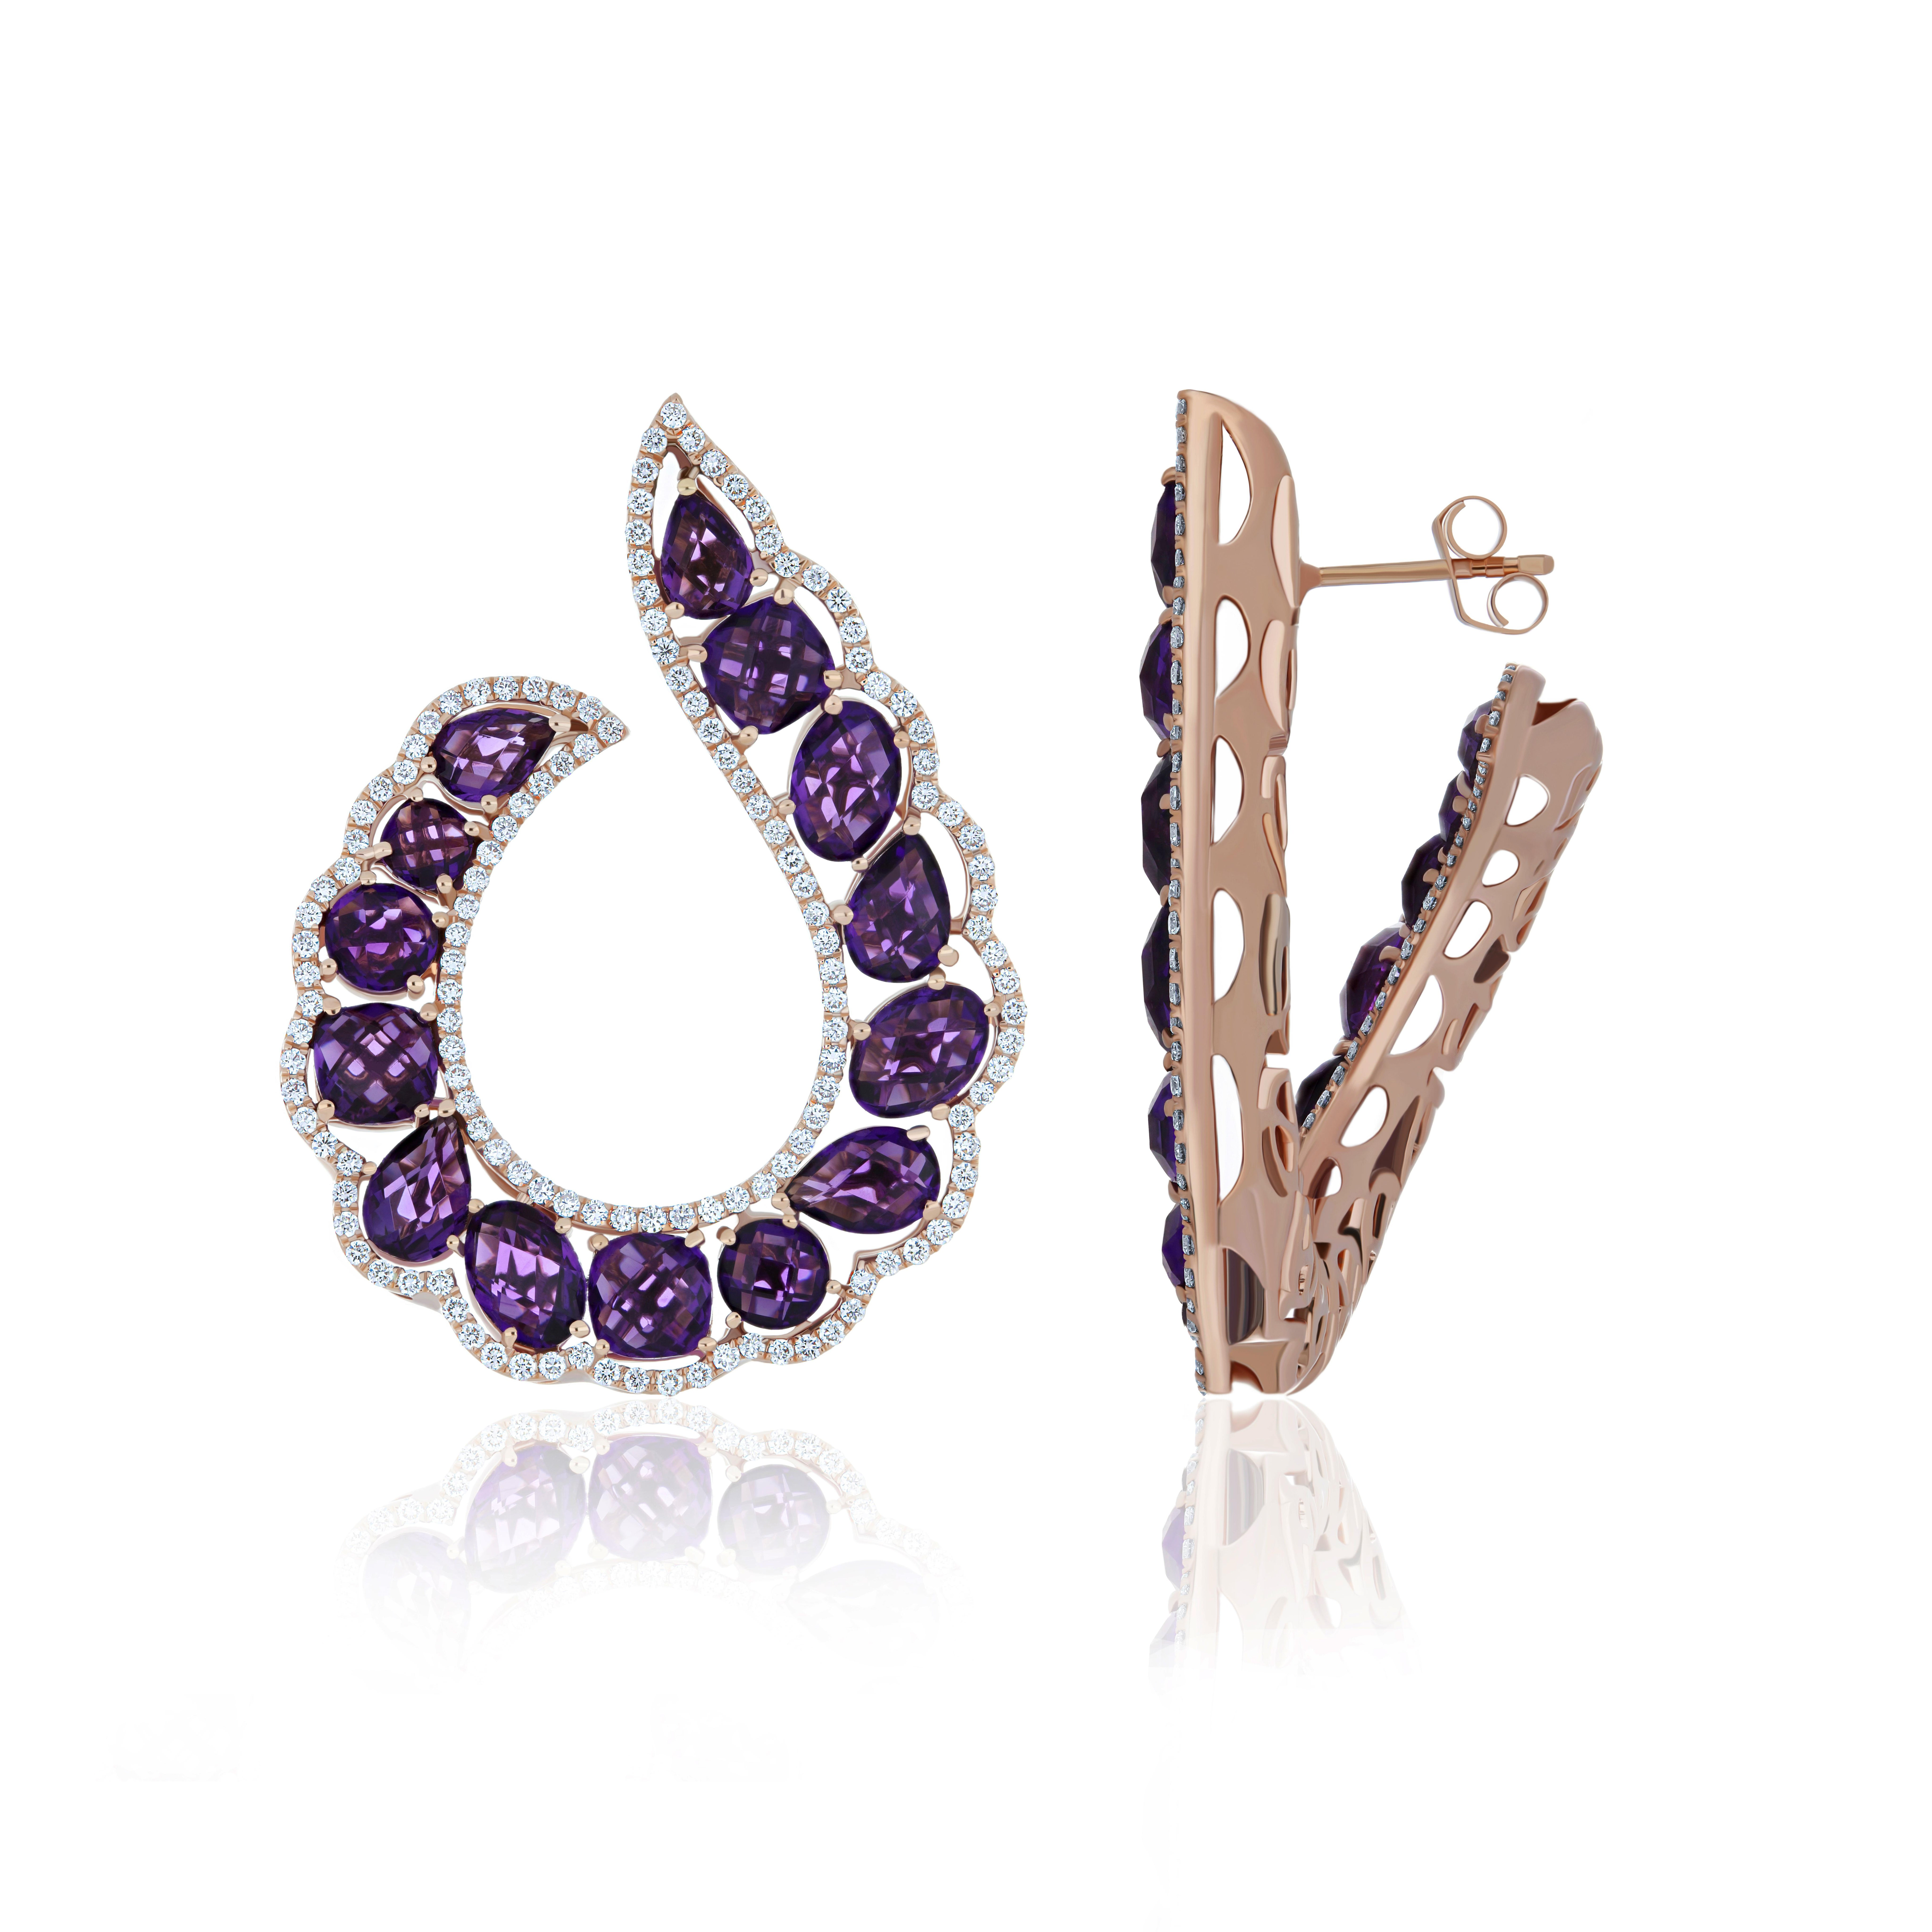 Elegant and Exquisitely detailed Rose Gold Earring, with 15.5 Cts. (approx.) Amethyst Briolette cut in Unique Fancy Shape accented with micro pave Diamonds, weighing approx. 2.00cts. (approx.). total carat weight. Beautifully Hand-Crafted Earring in